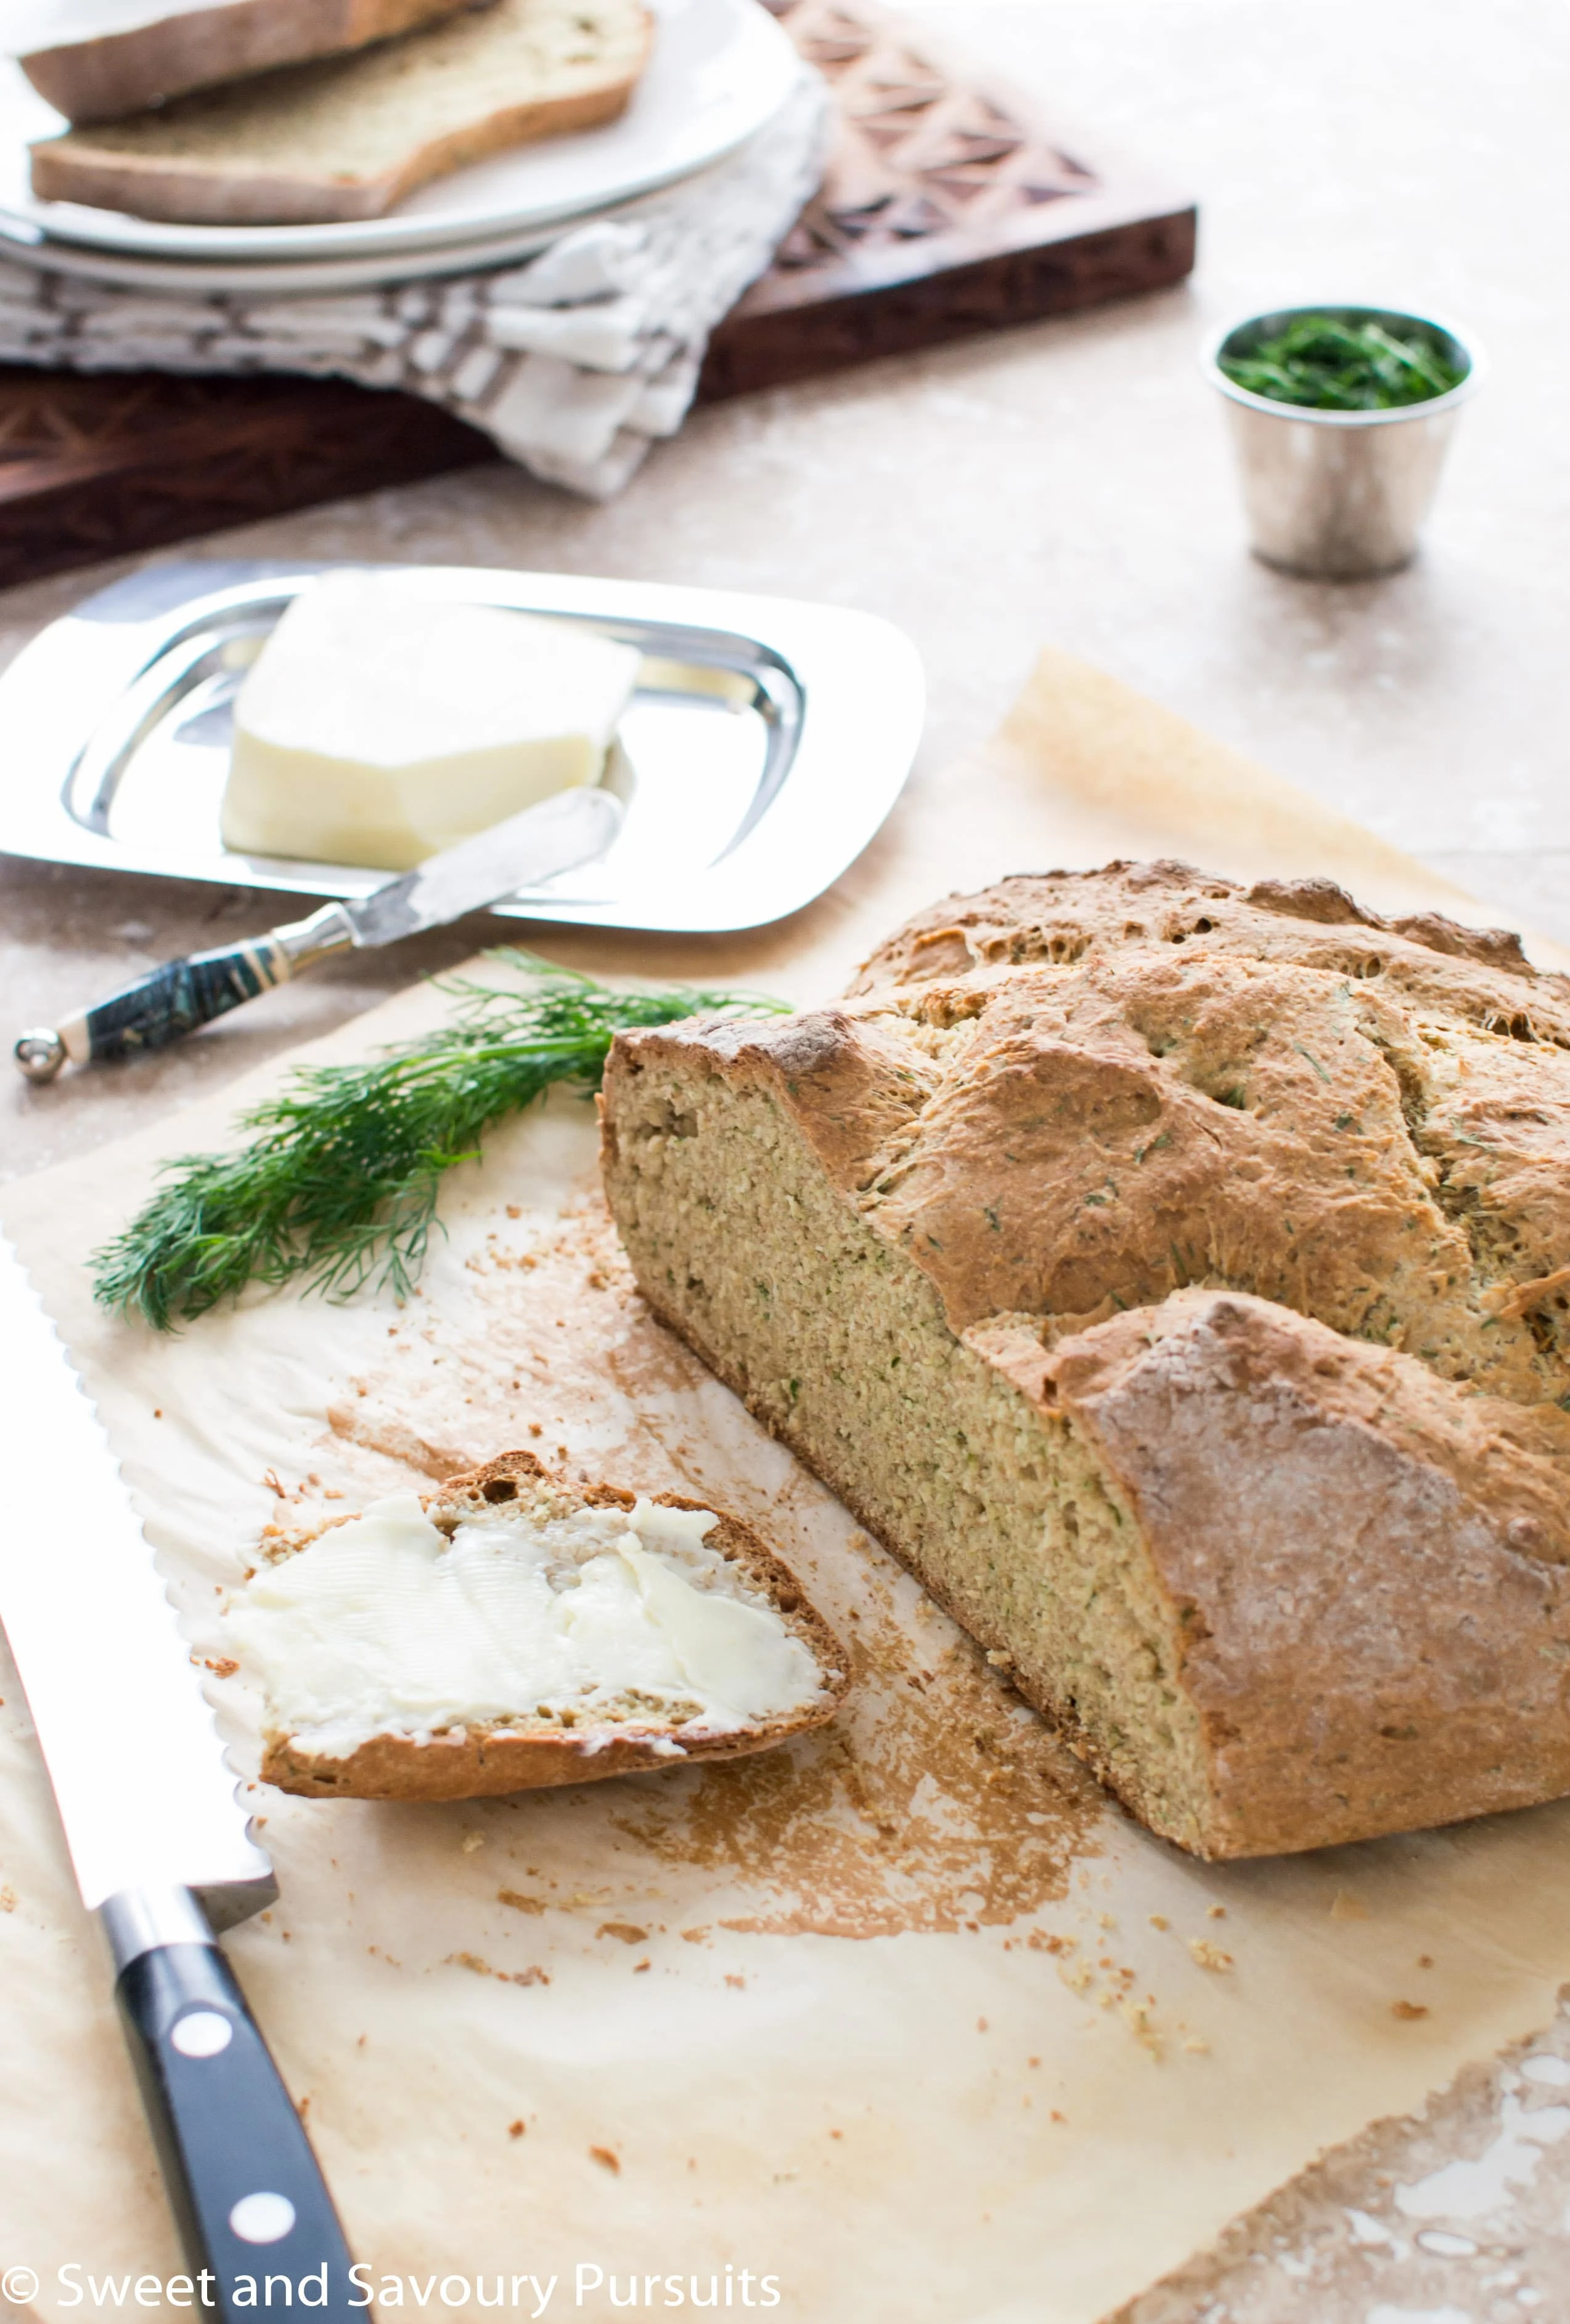 Irish Soda Bread with cut and buttered slice.